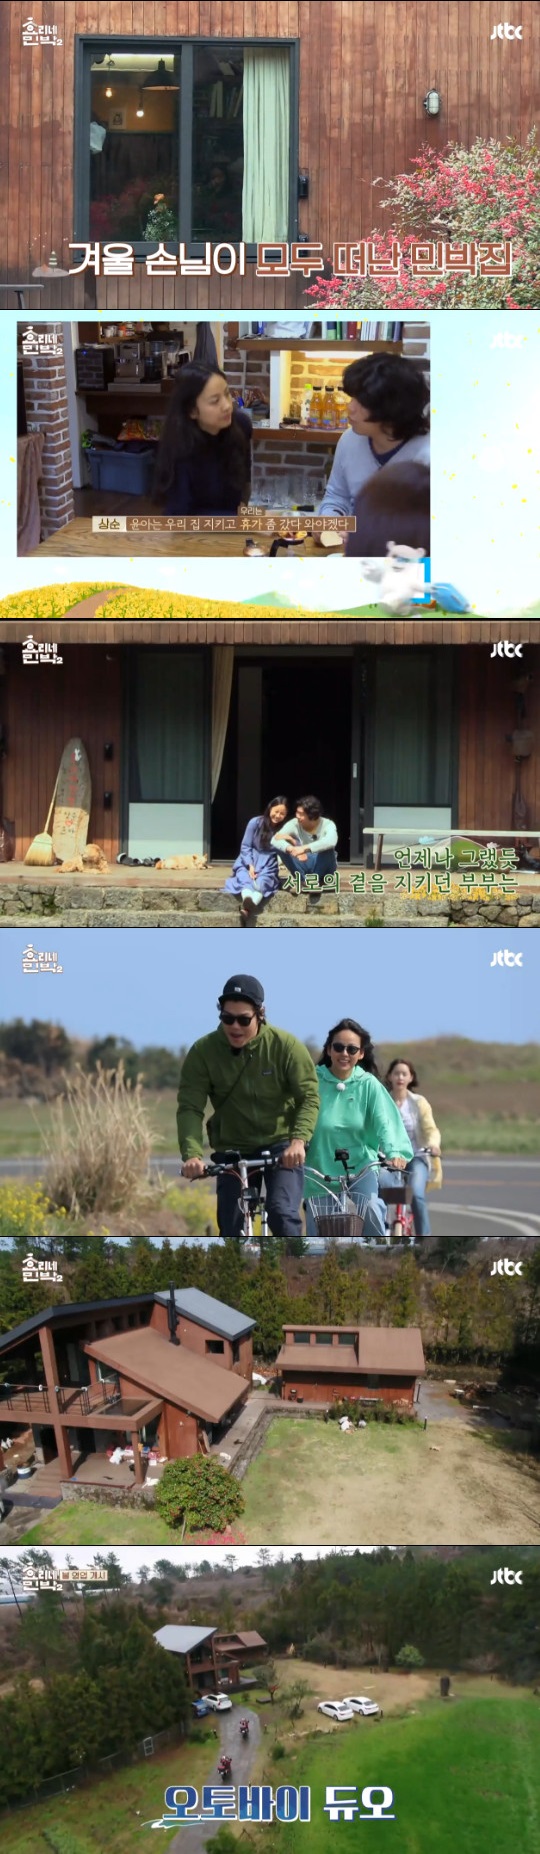 The opening of the Hyeori House Minshuku in spring was foretold.The comprehensive organization channel JTBC entertainment program Hyeori House B & B broadcasted on the 15th night was drawn to show that the Guest House winter business is over.All guests of Guest House left this day and the appearance of Lee Hyo ri Sansun Yoona who took a vacation took a radio wave.